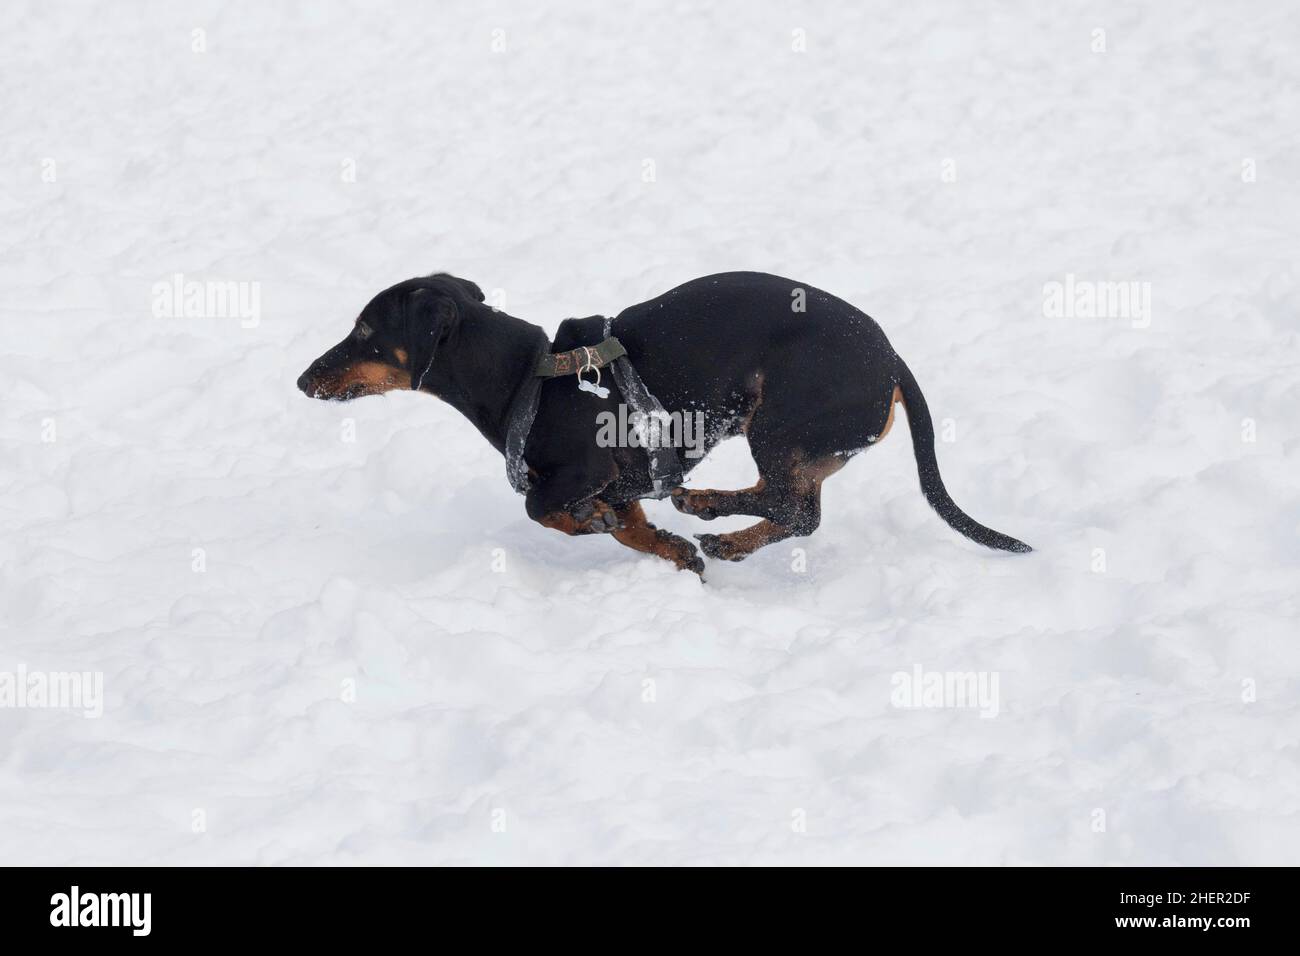 Cute dachshund puppy is running on a white snow in the winter park. Badger dor or sausage dog. Pet animals. Purebred dog. Stock Photo